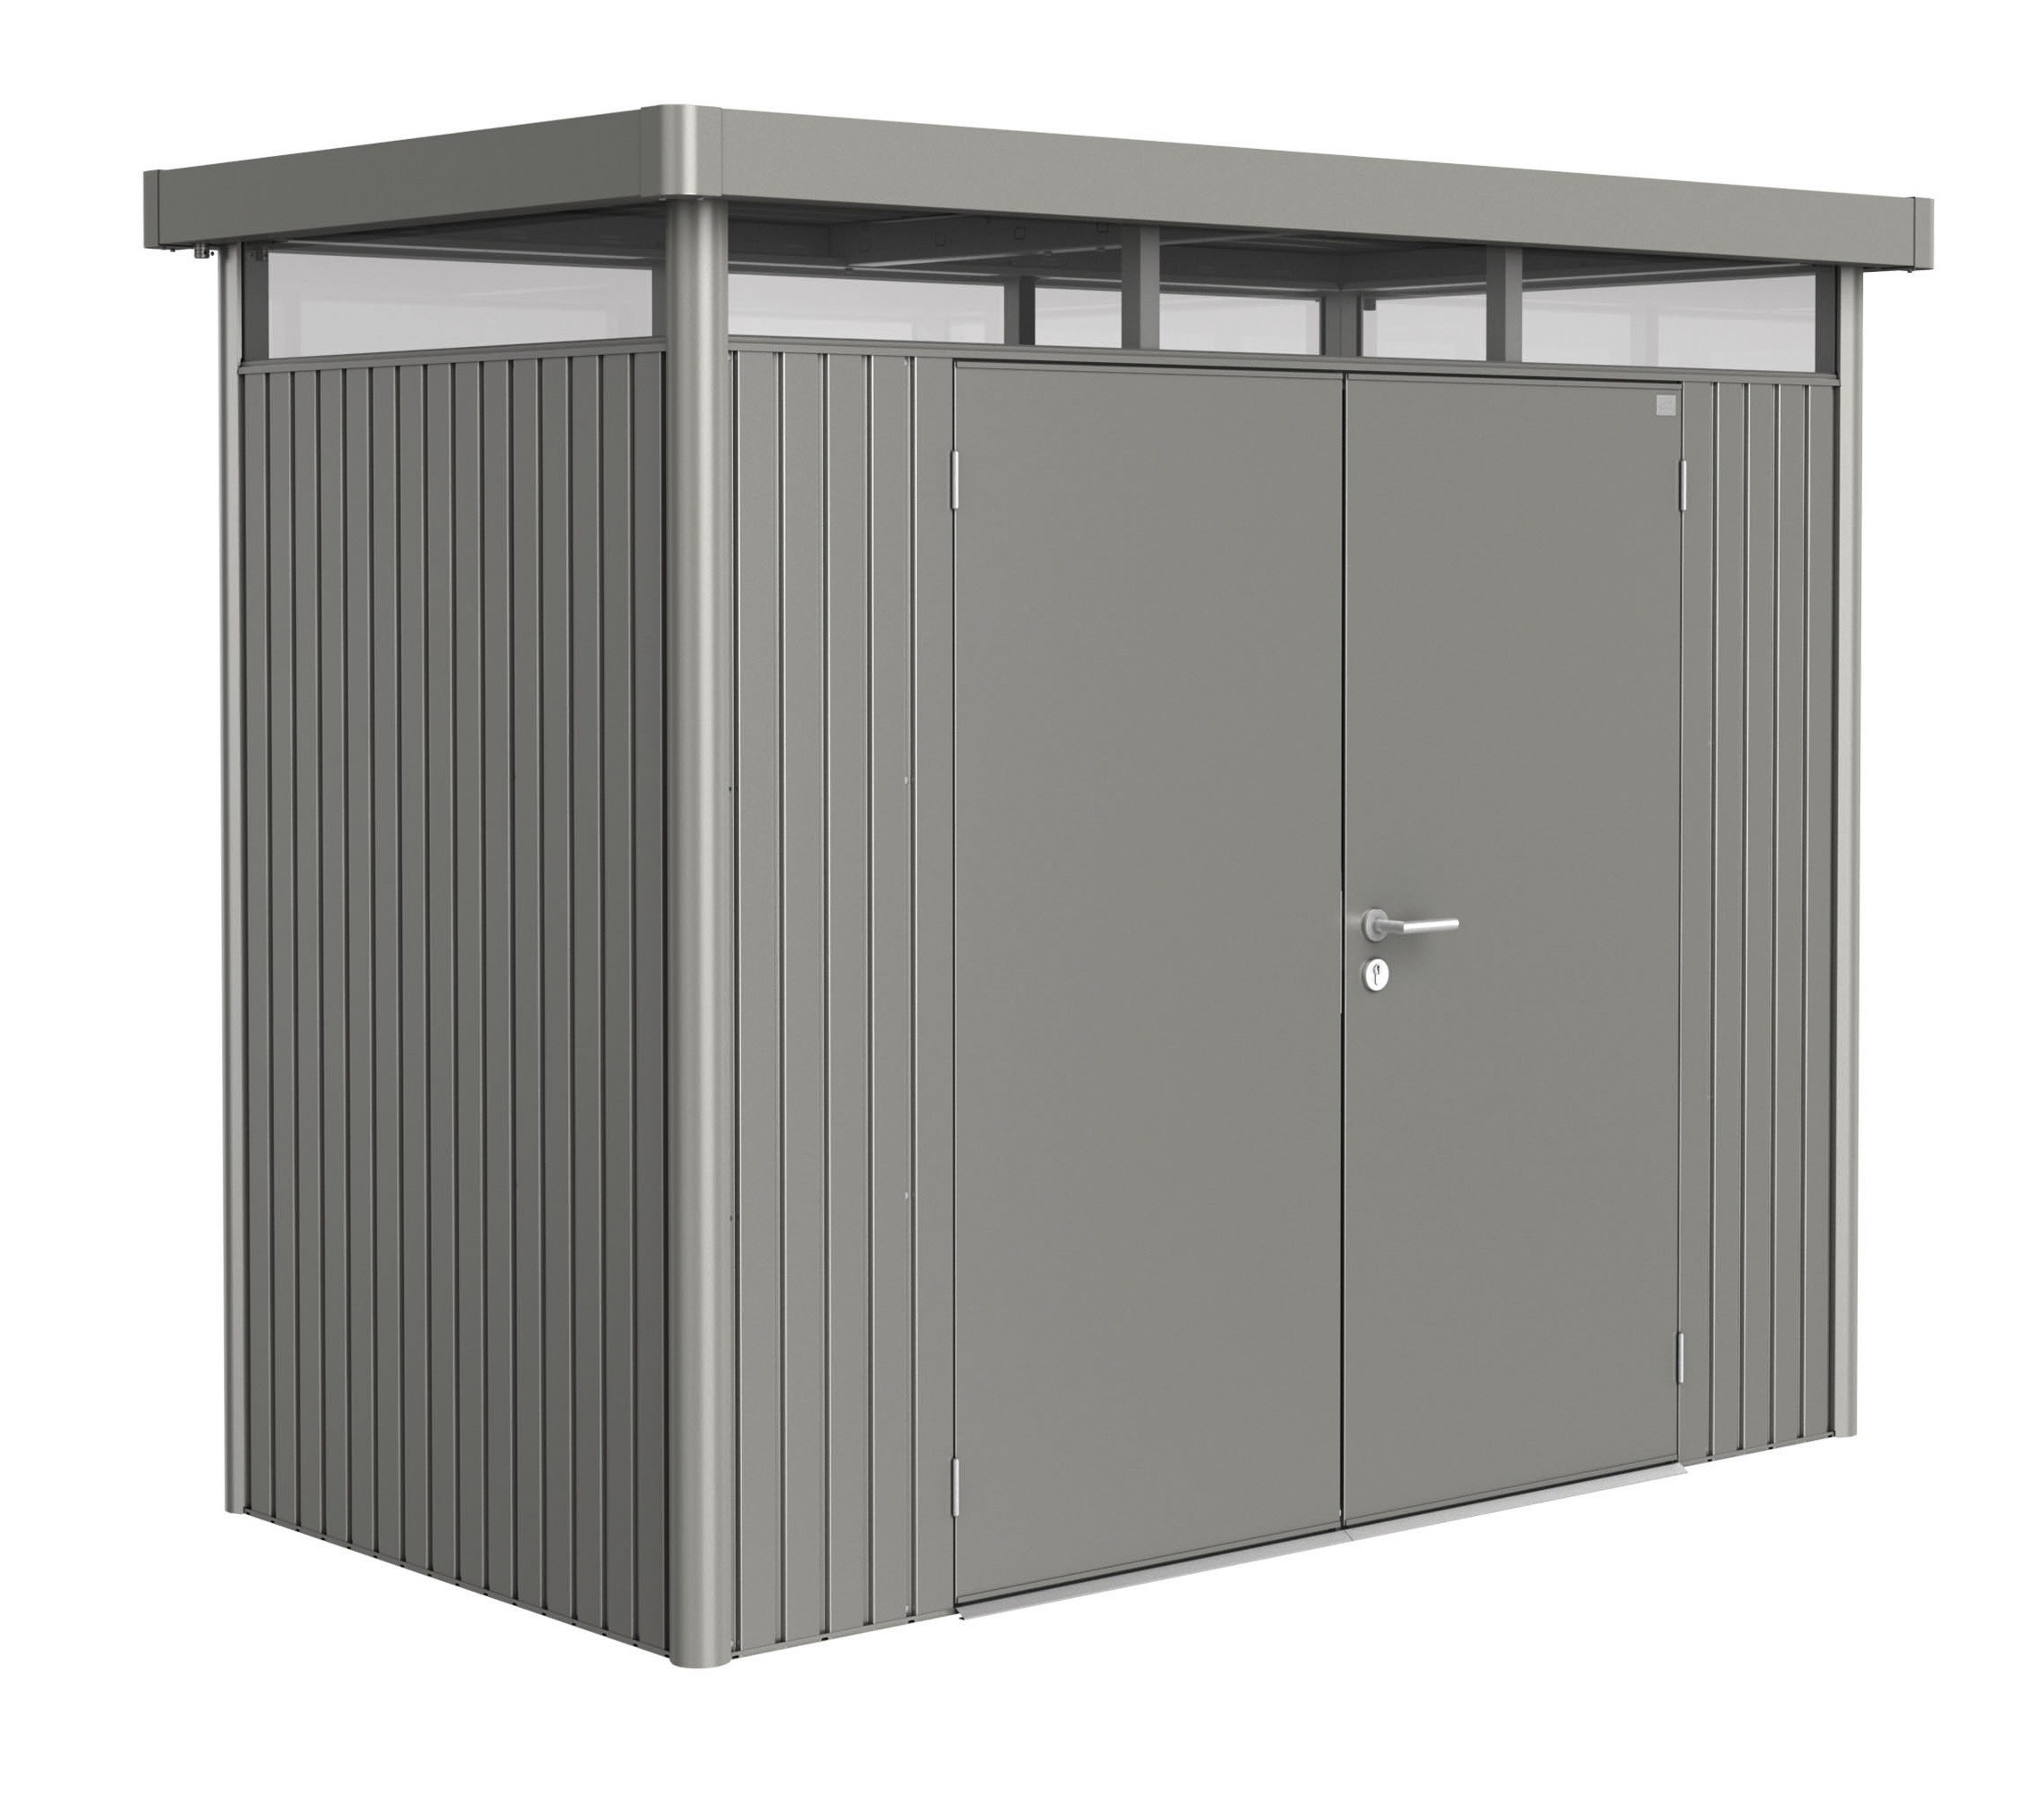 Biohort Heavy Duty Avant Garde Highline H1 Double Door Metal Shed throughout size 2273 X 2041